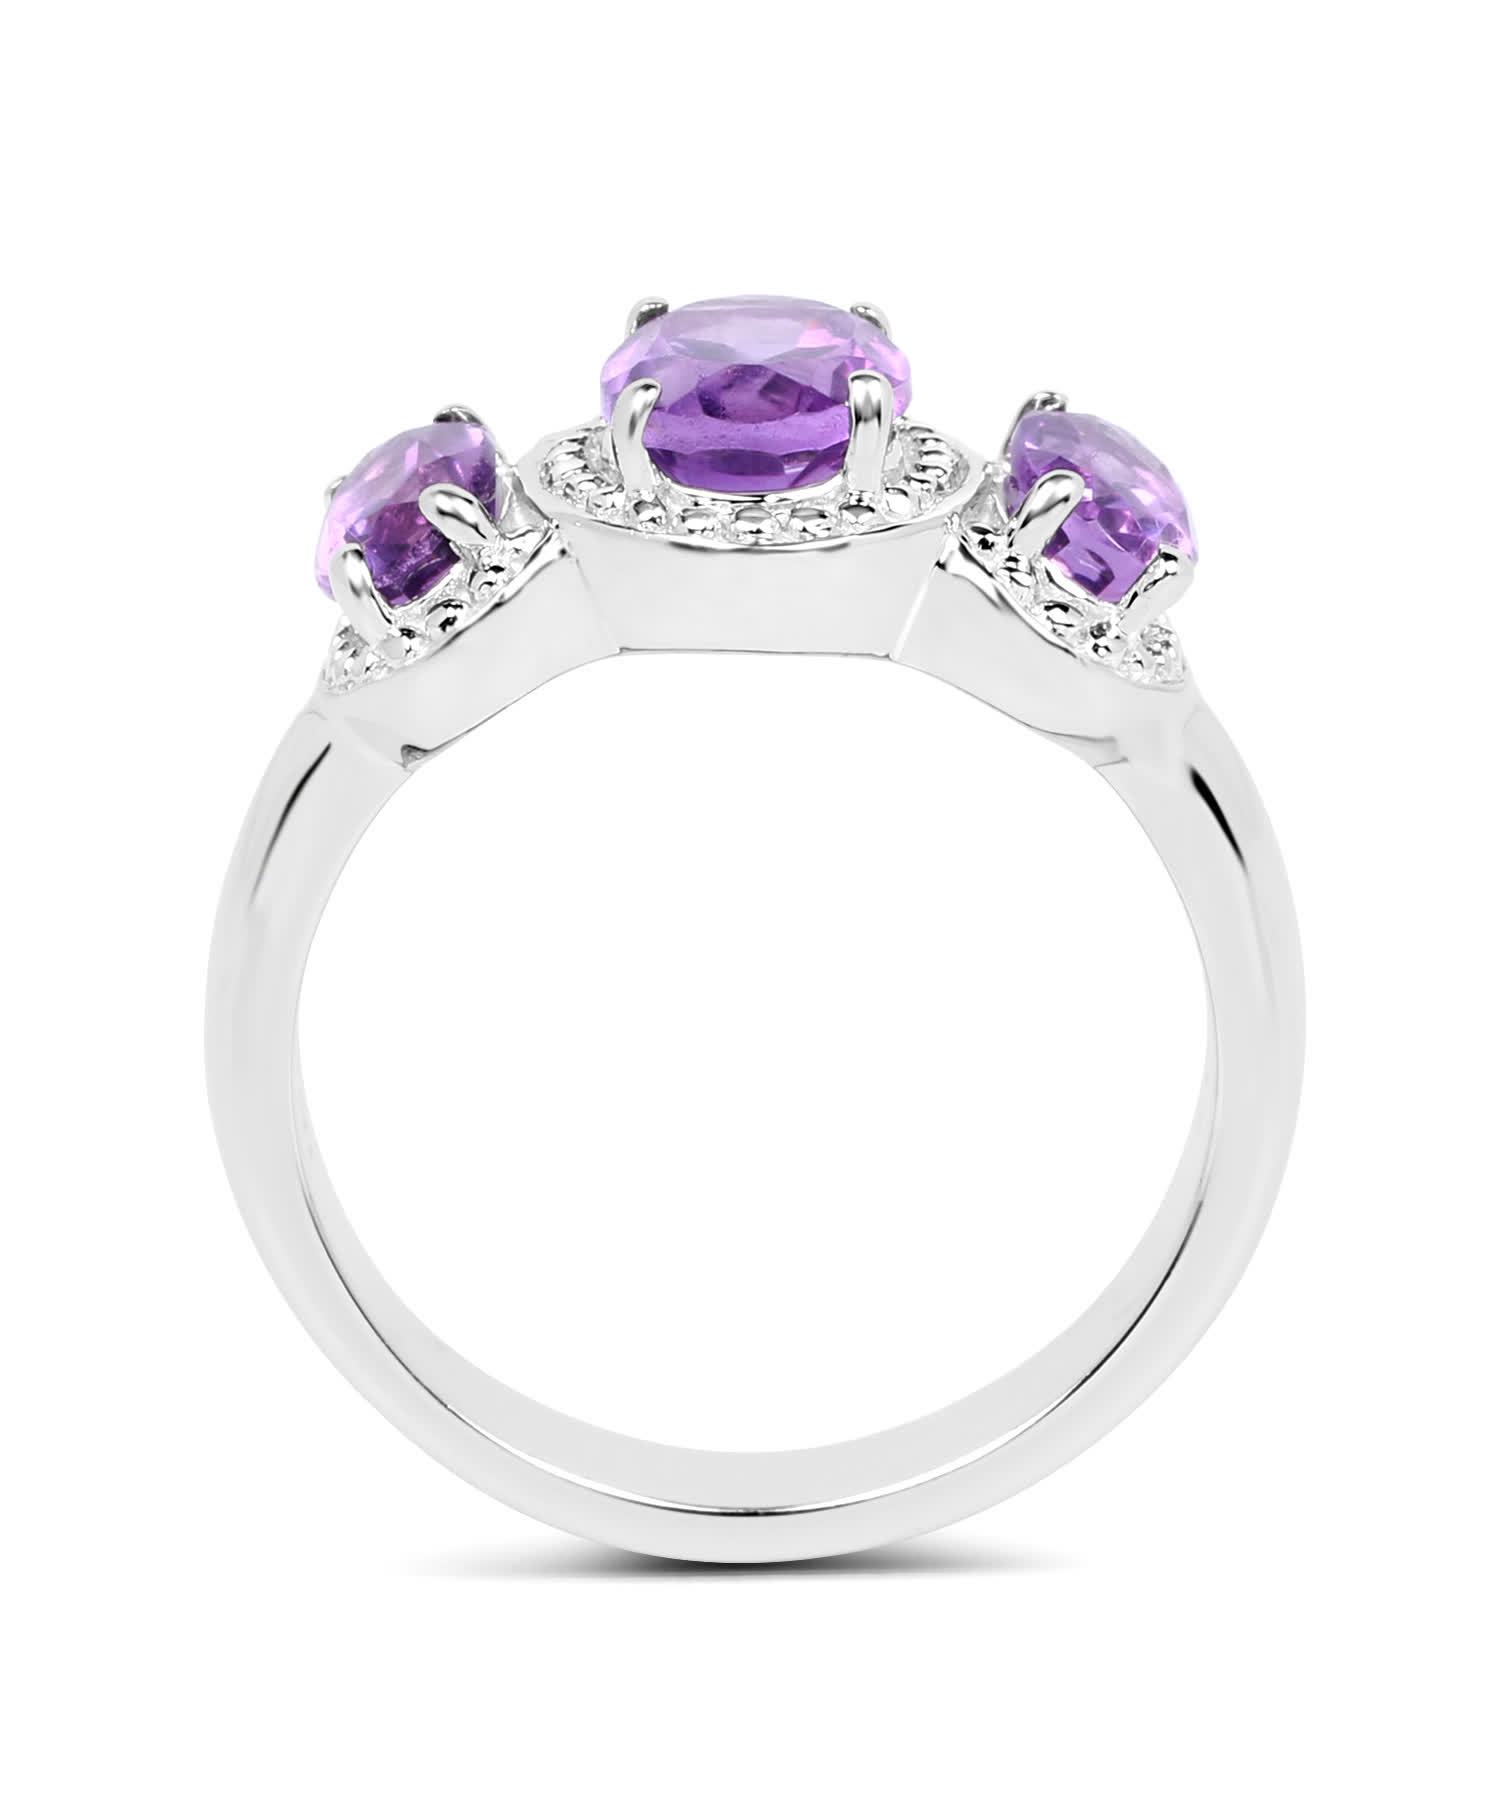 2.01ctw Natural Amethyst Rhodium Plated 925 Sterling Silver Fashion Three-Stone Ring View 2